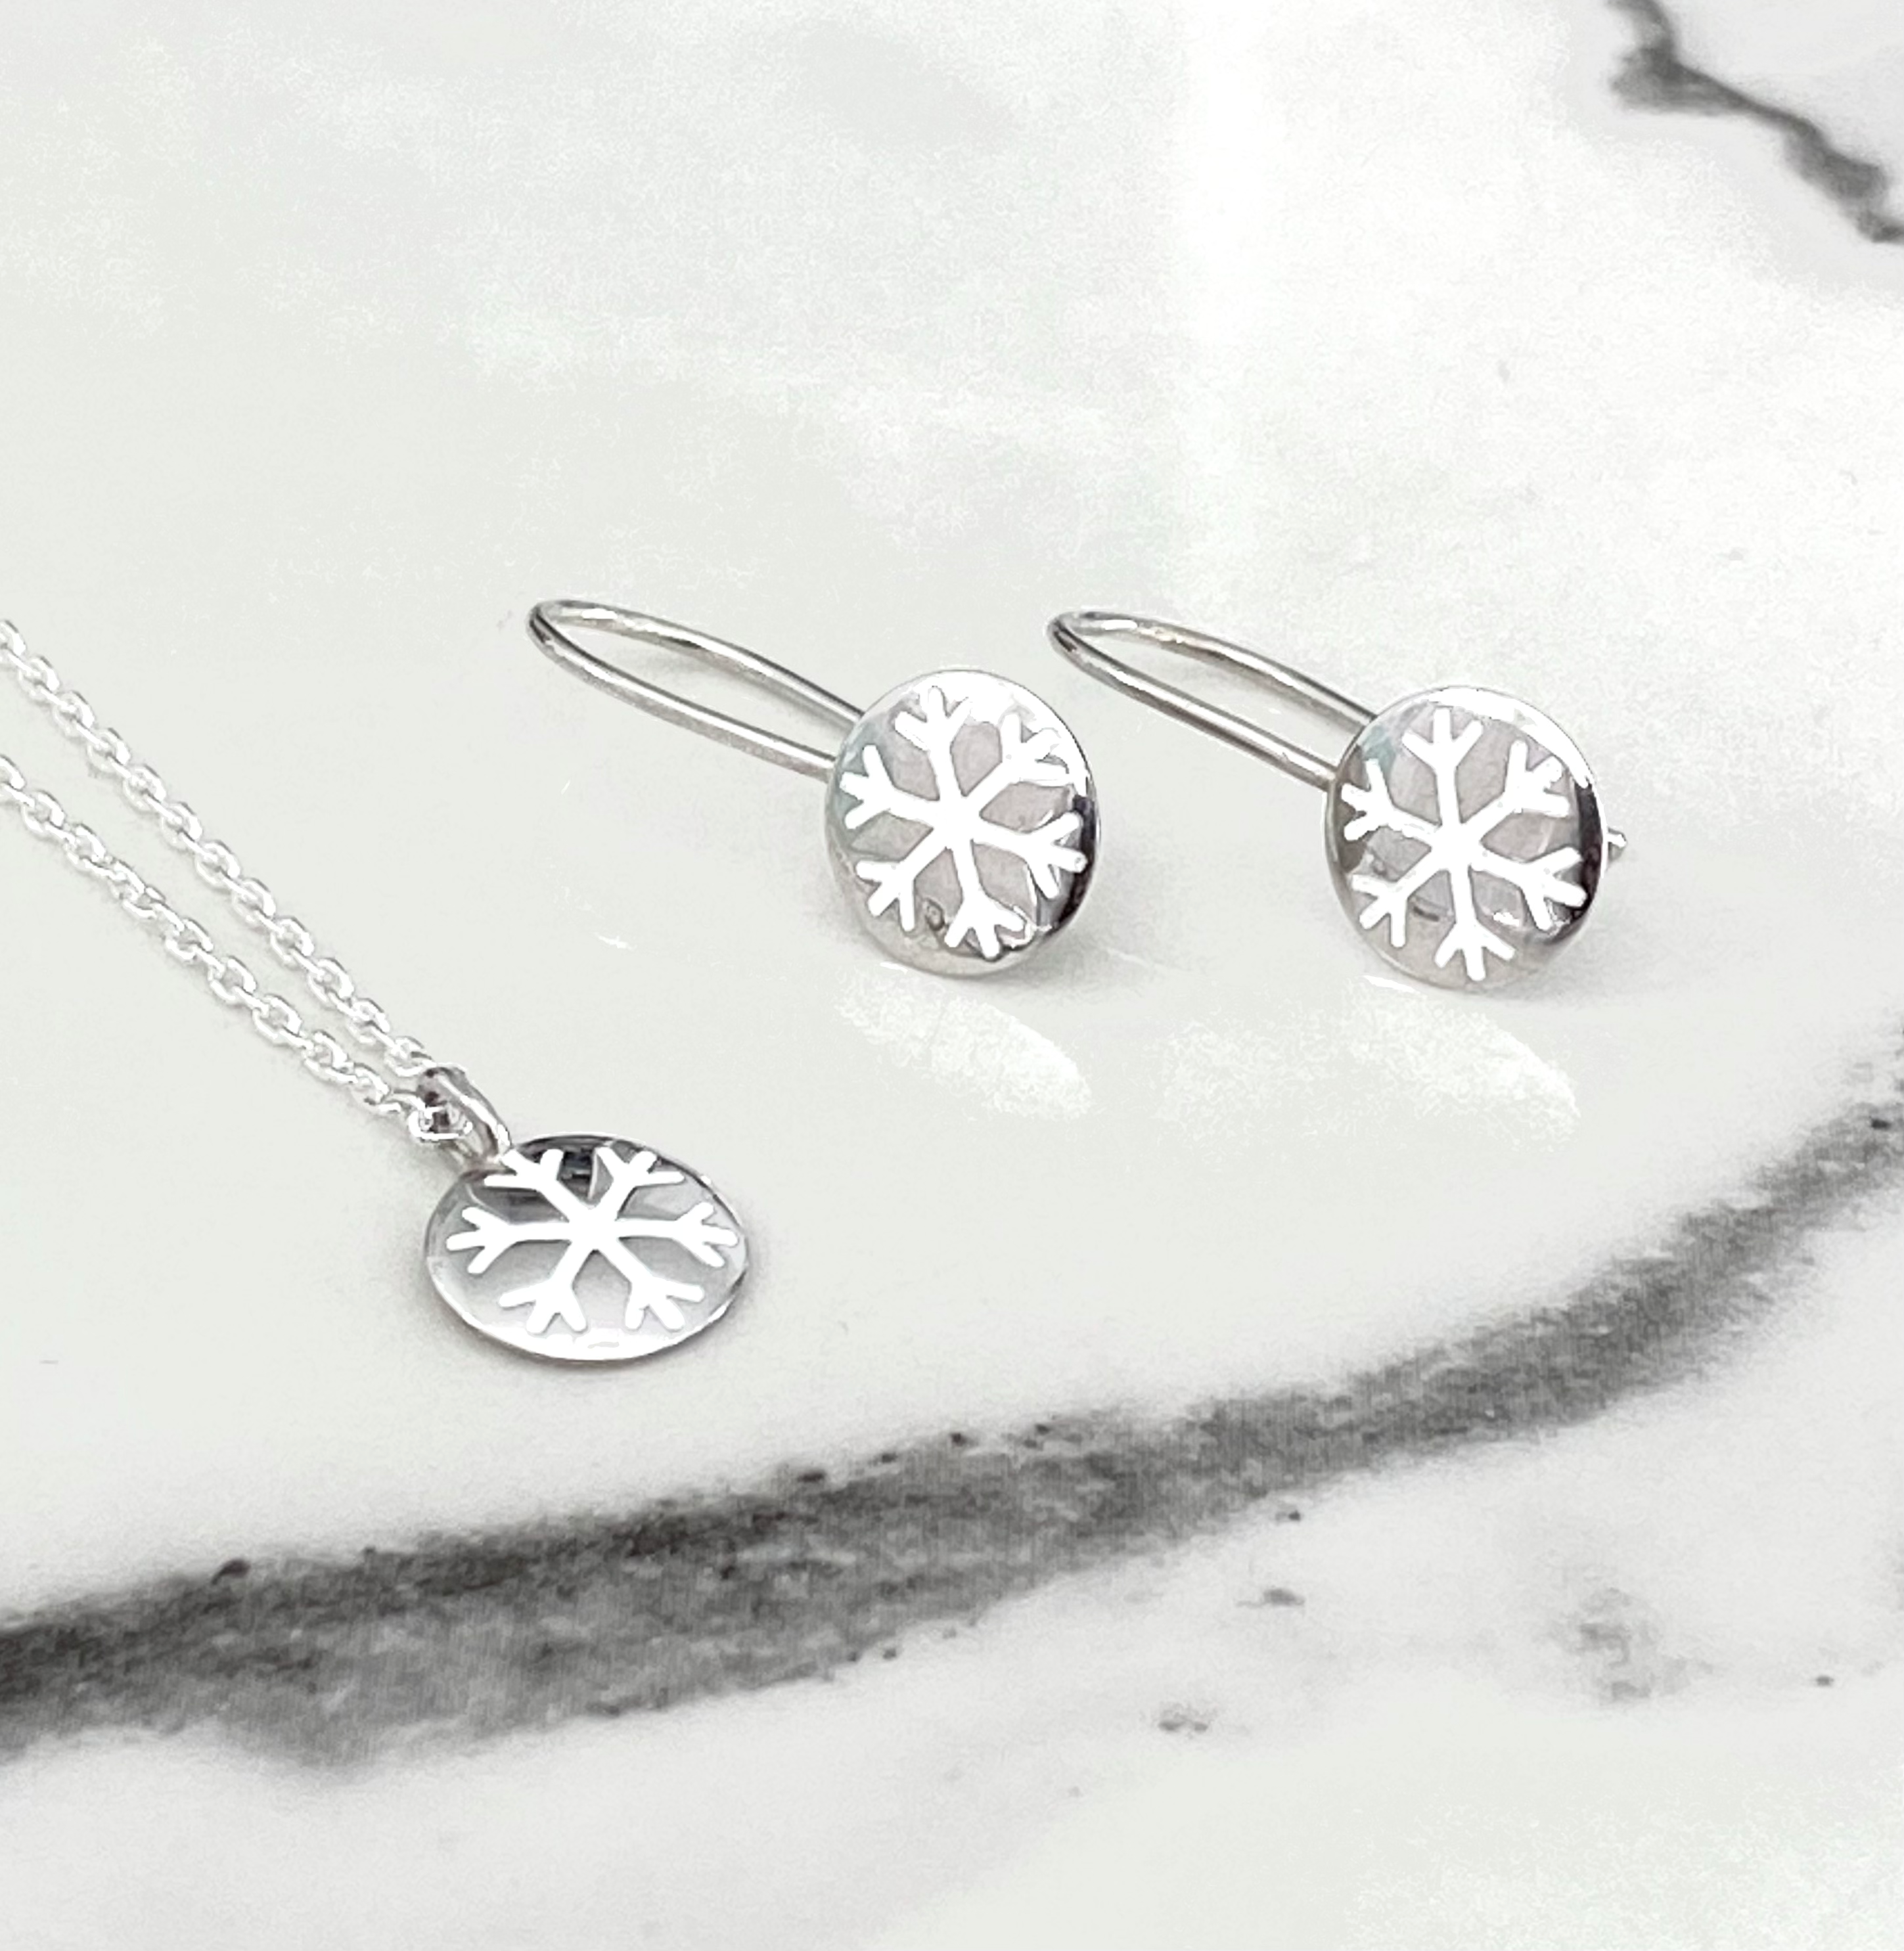 Snowflake Earrings with Enamel Accent